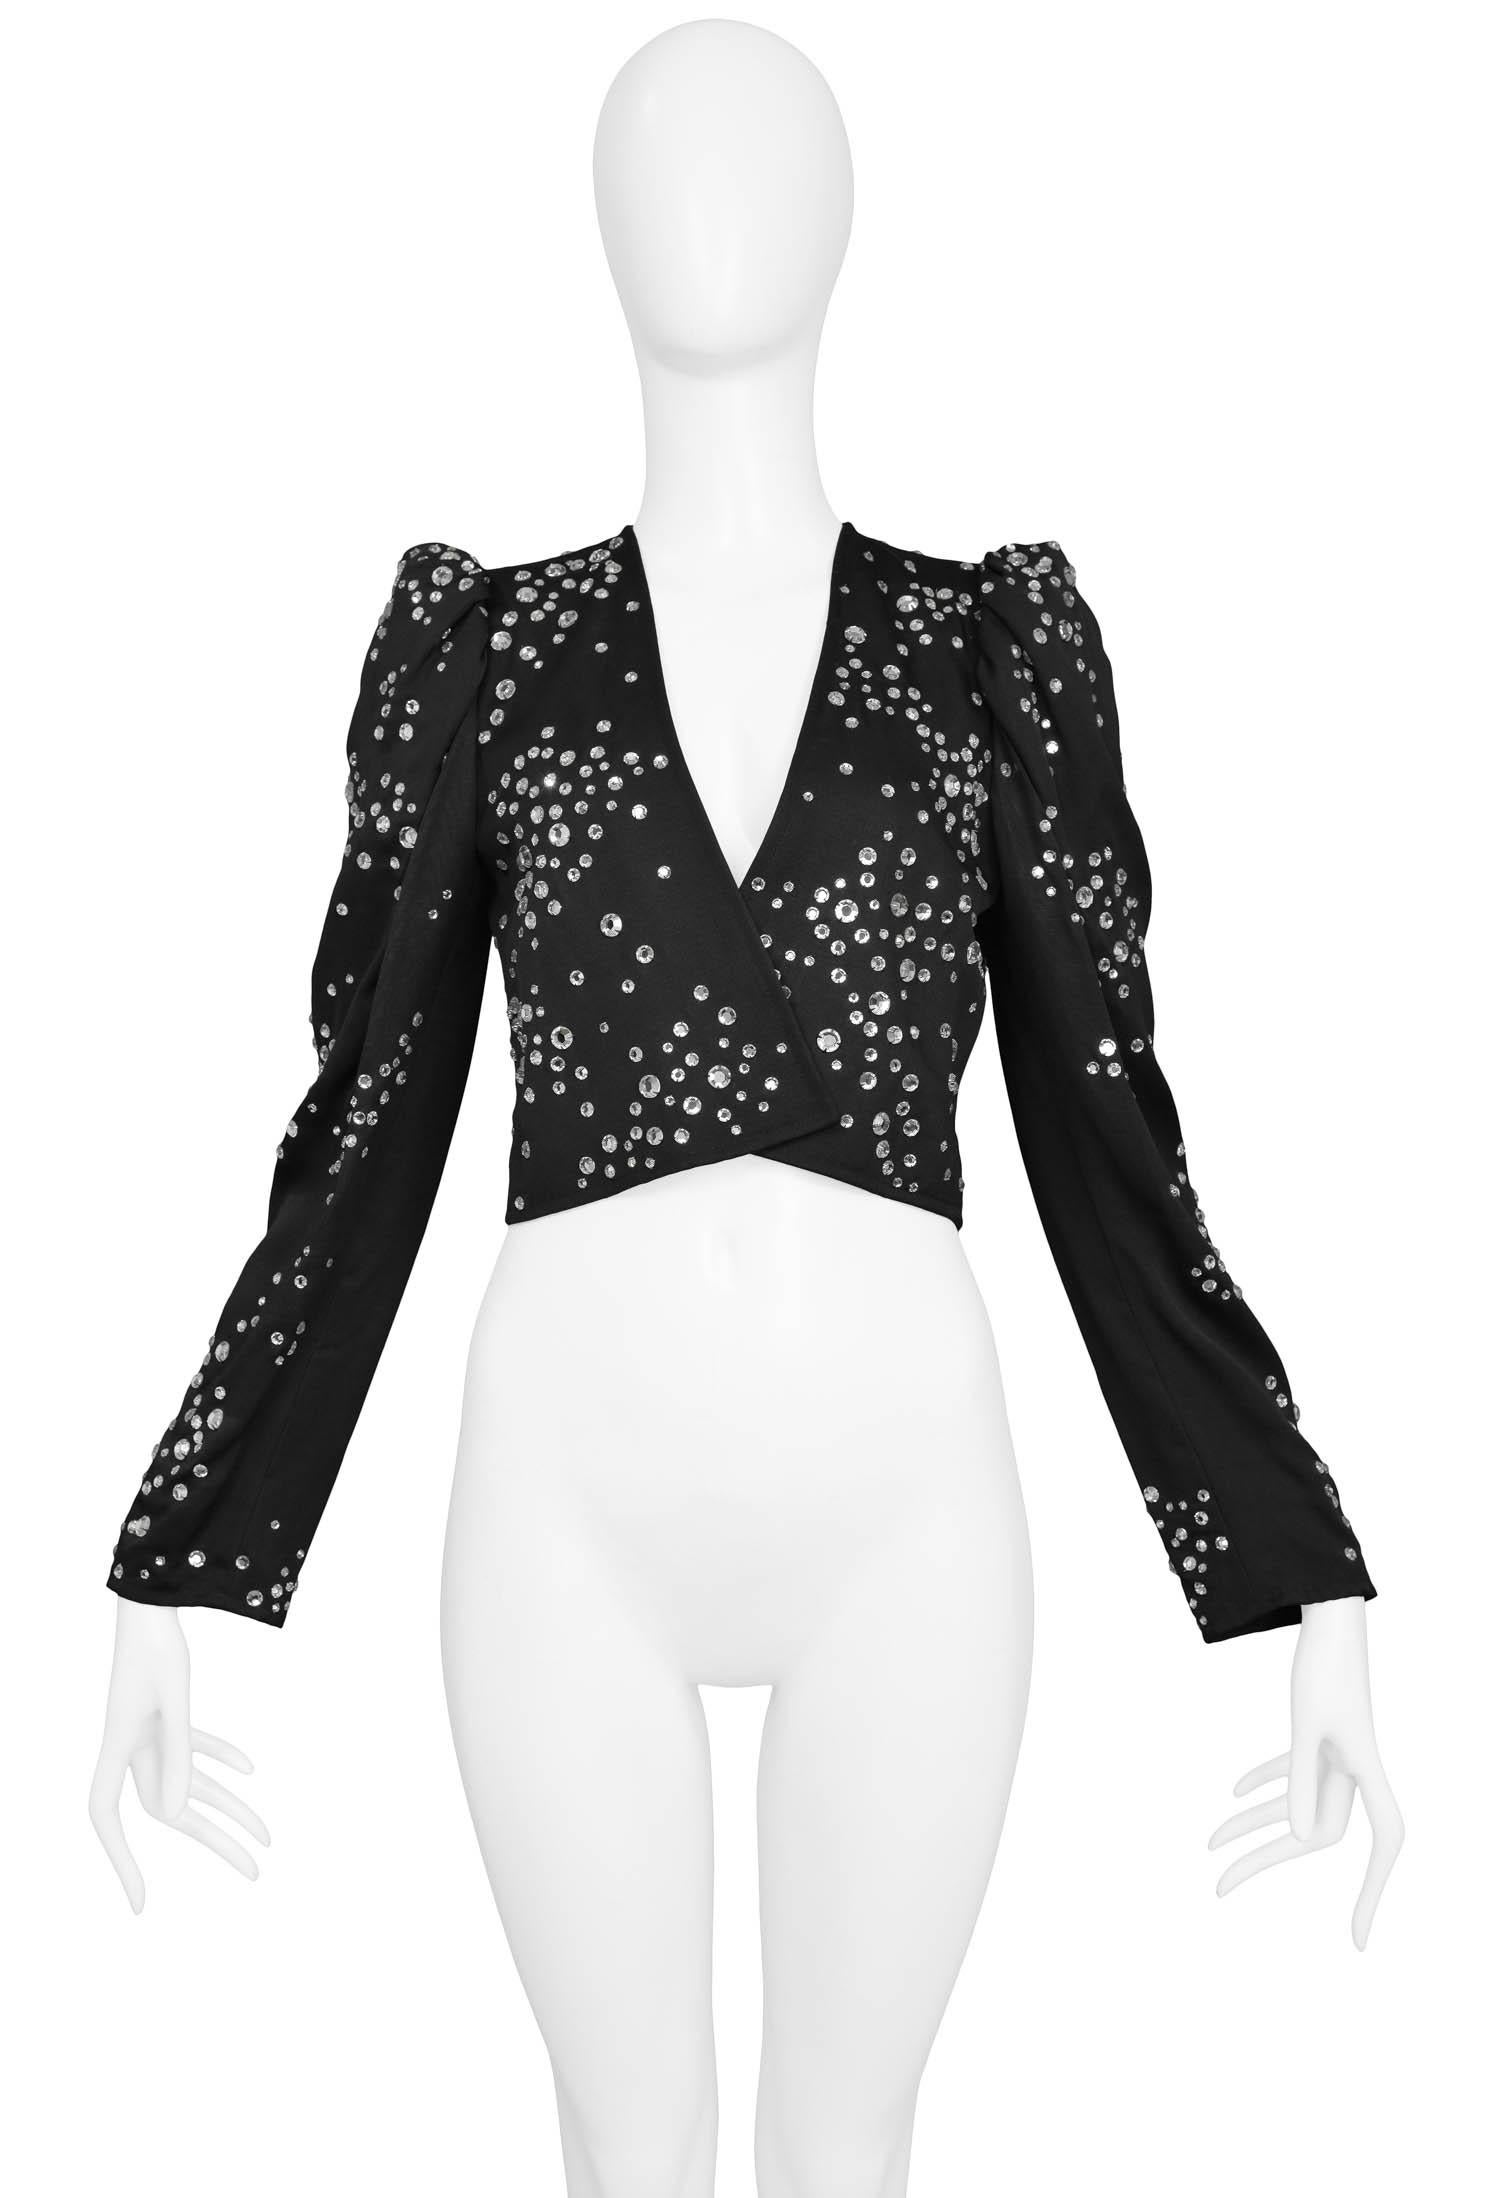 Vintage Yves Saint Laurent black silk faille jacket featuring all-over clear crystal studded embellishments & structured shoulders with gathering. 1983 Collection. 

Excellent Condition.

Size: 36

